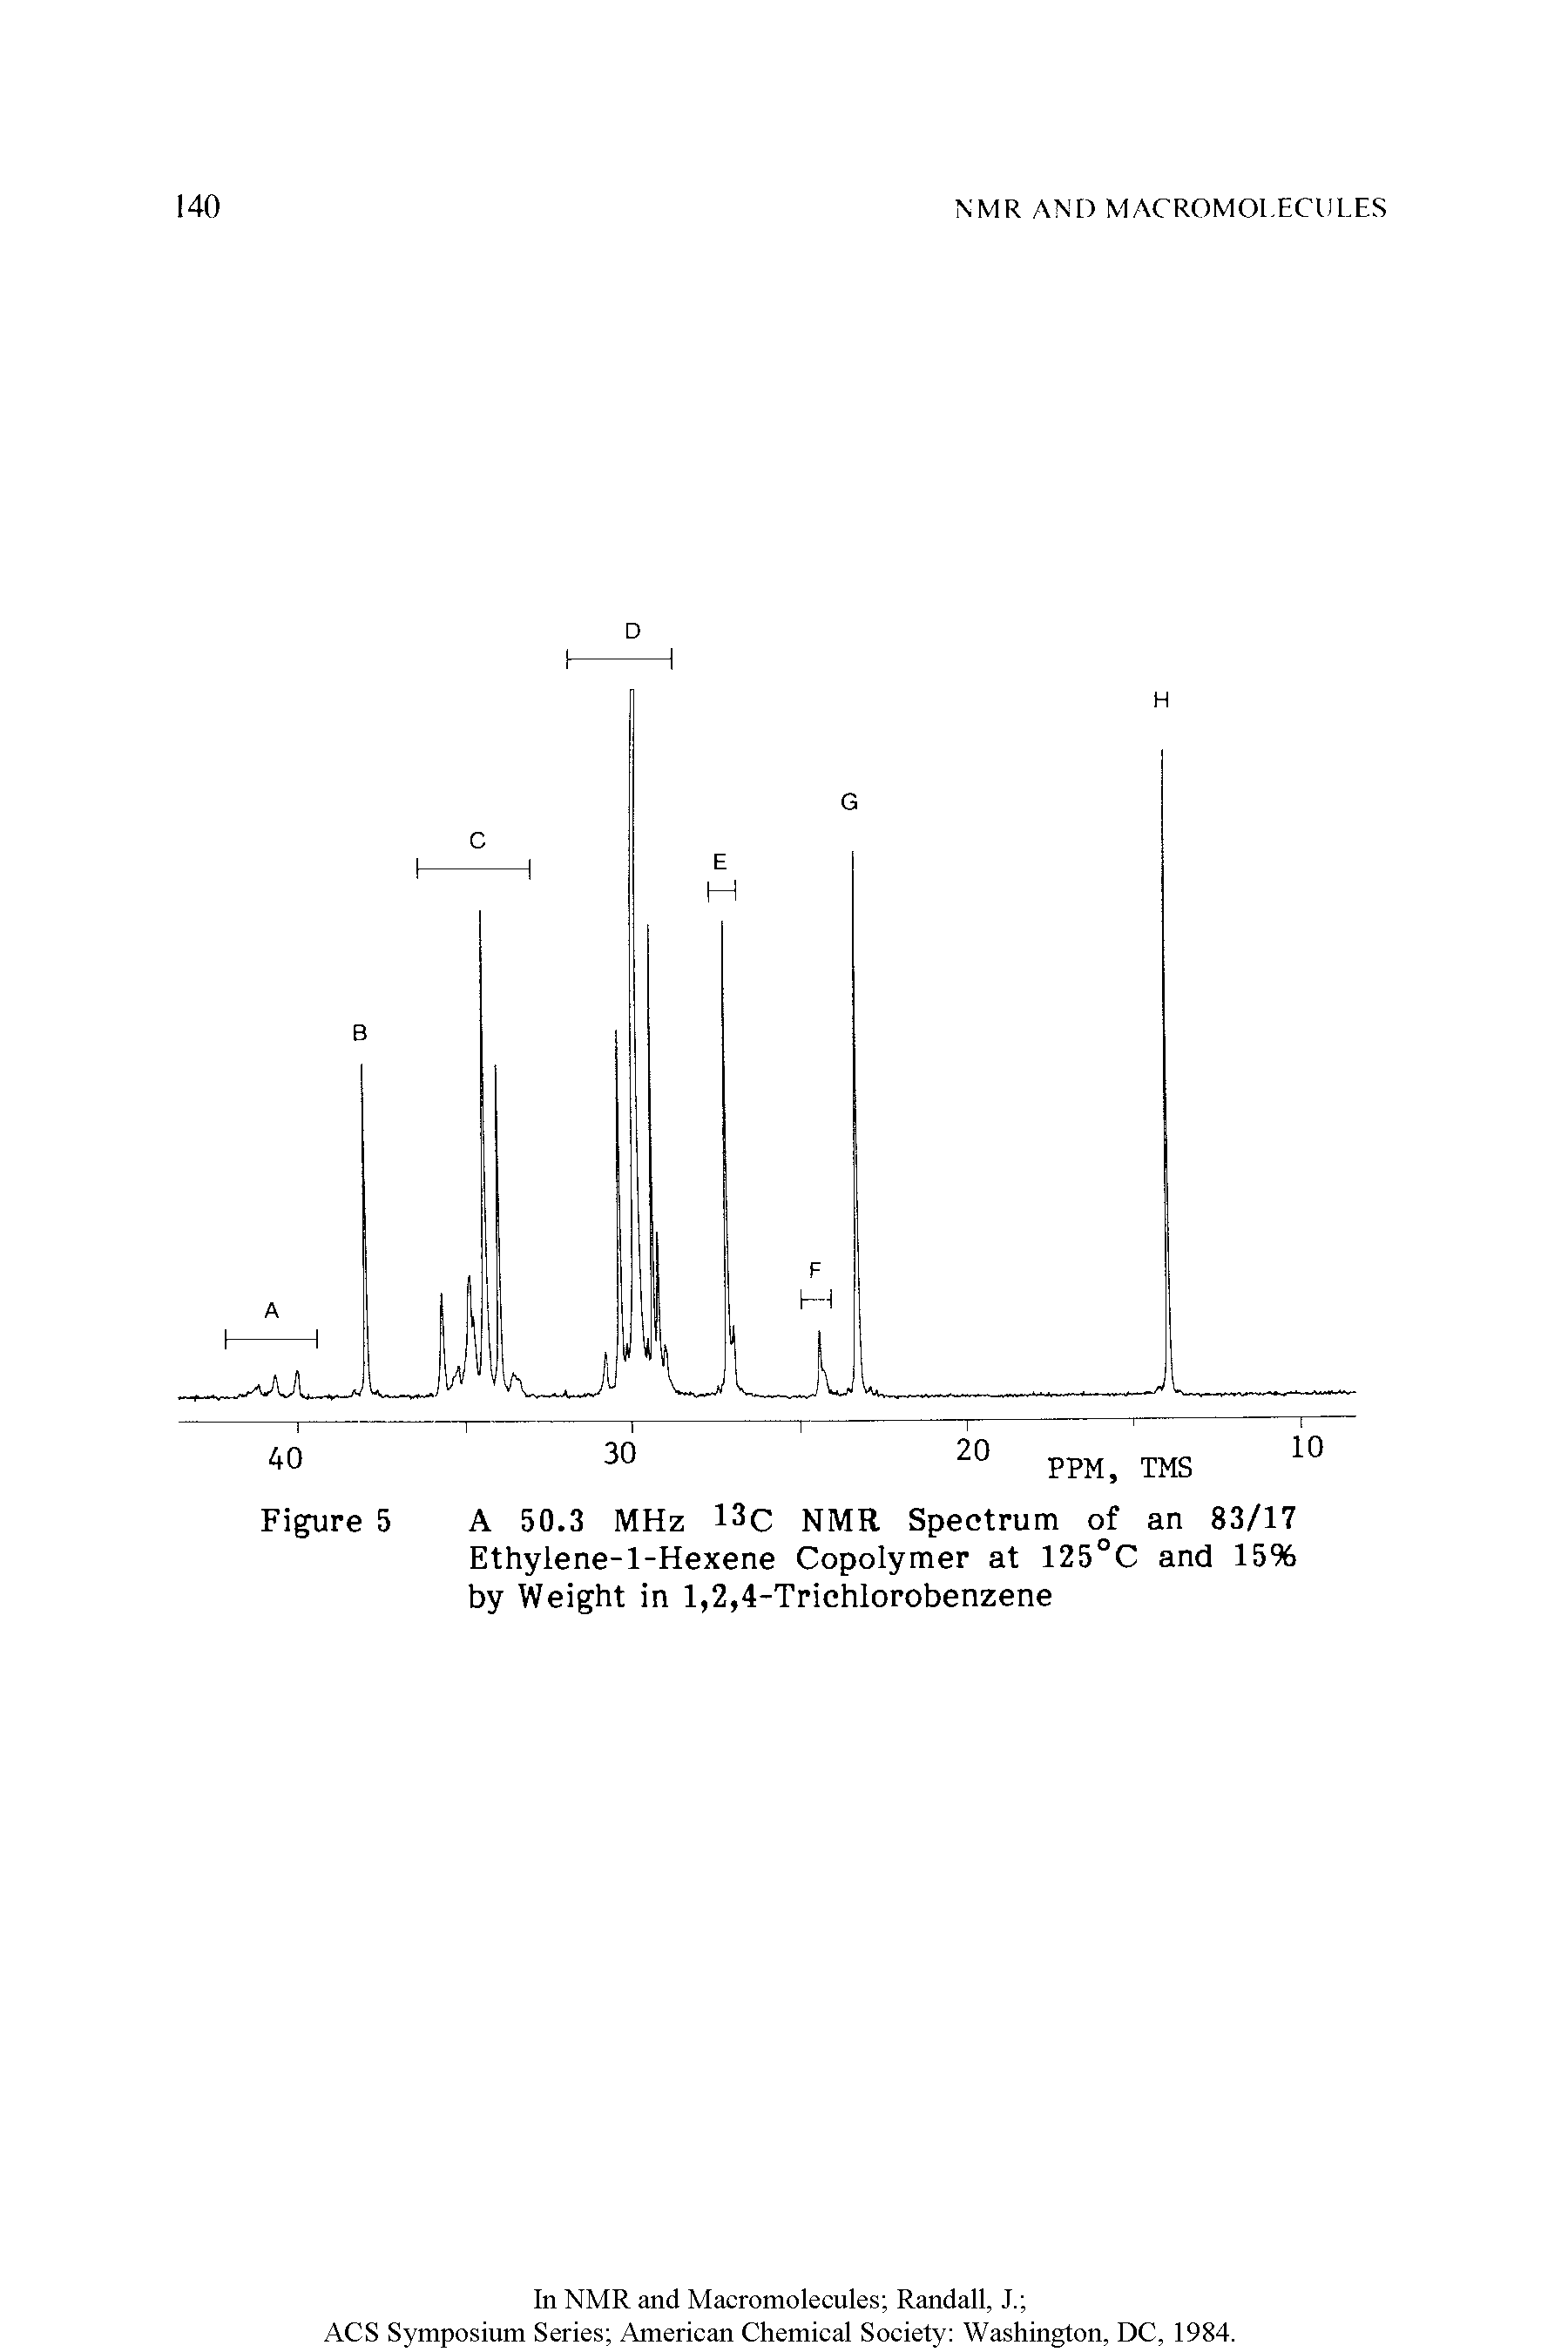 Figure 5 A 50.3 MHz 13c NMR Spectrum of an 83/17 Ethylene-l-Hexene Copolymer at 125°C and 15% by Weight in 1,2,4-Trichlorobenzene...